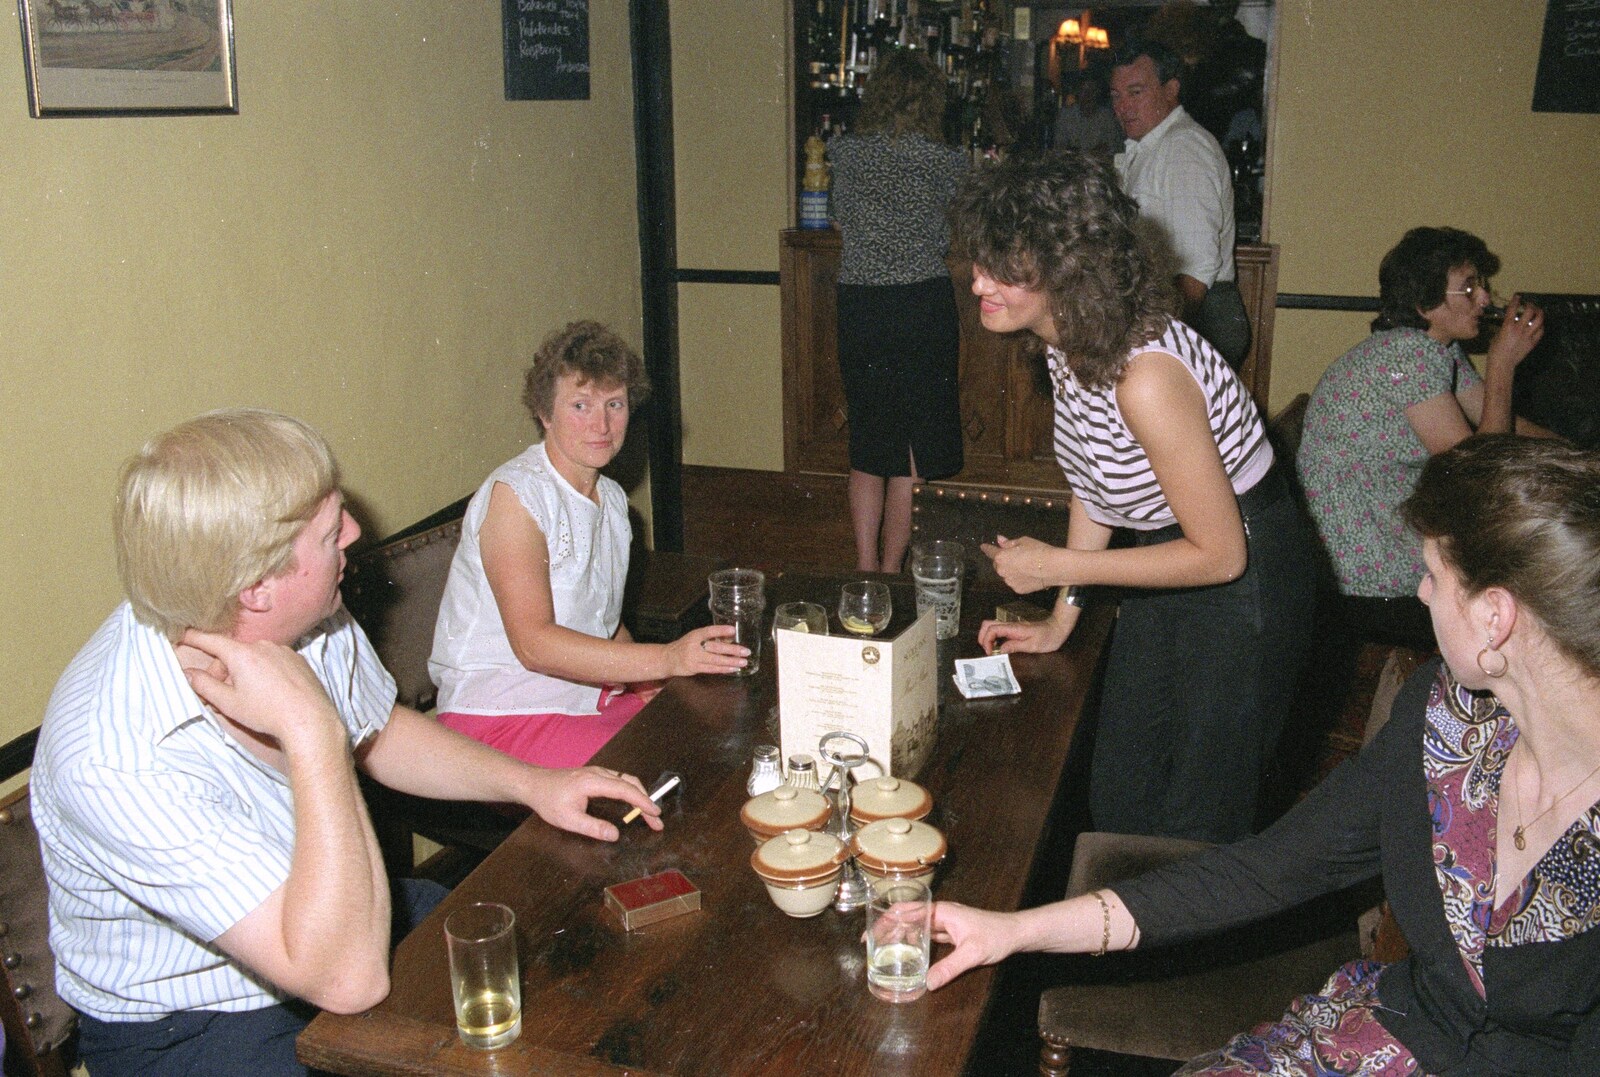 Stuston Sewerage and Kate's Printec Birthday, Scole Inn, Norfolk and Suffolk - 2nd August 1990: Rachel's getting the next round in